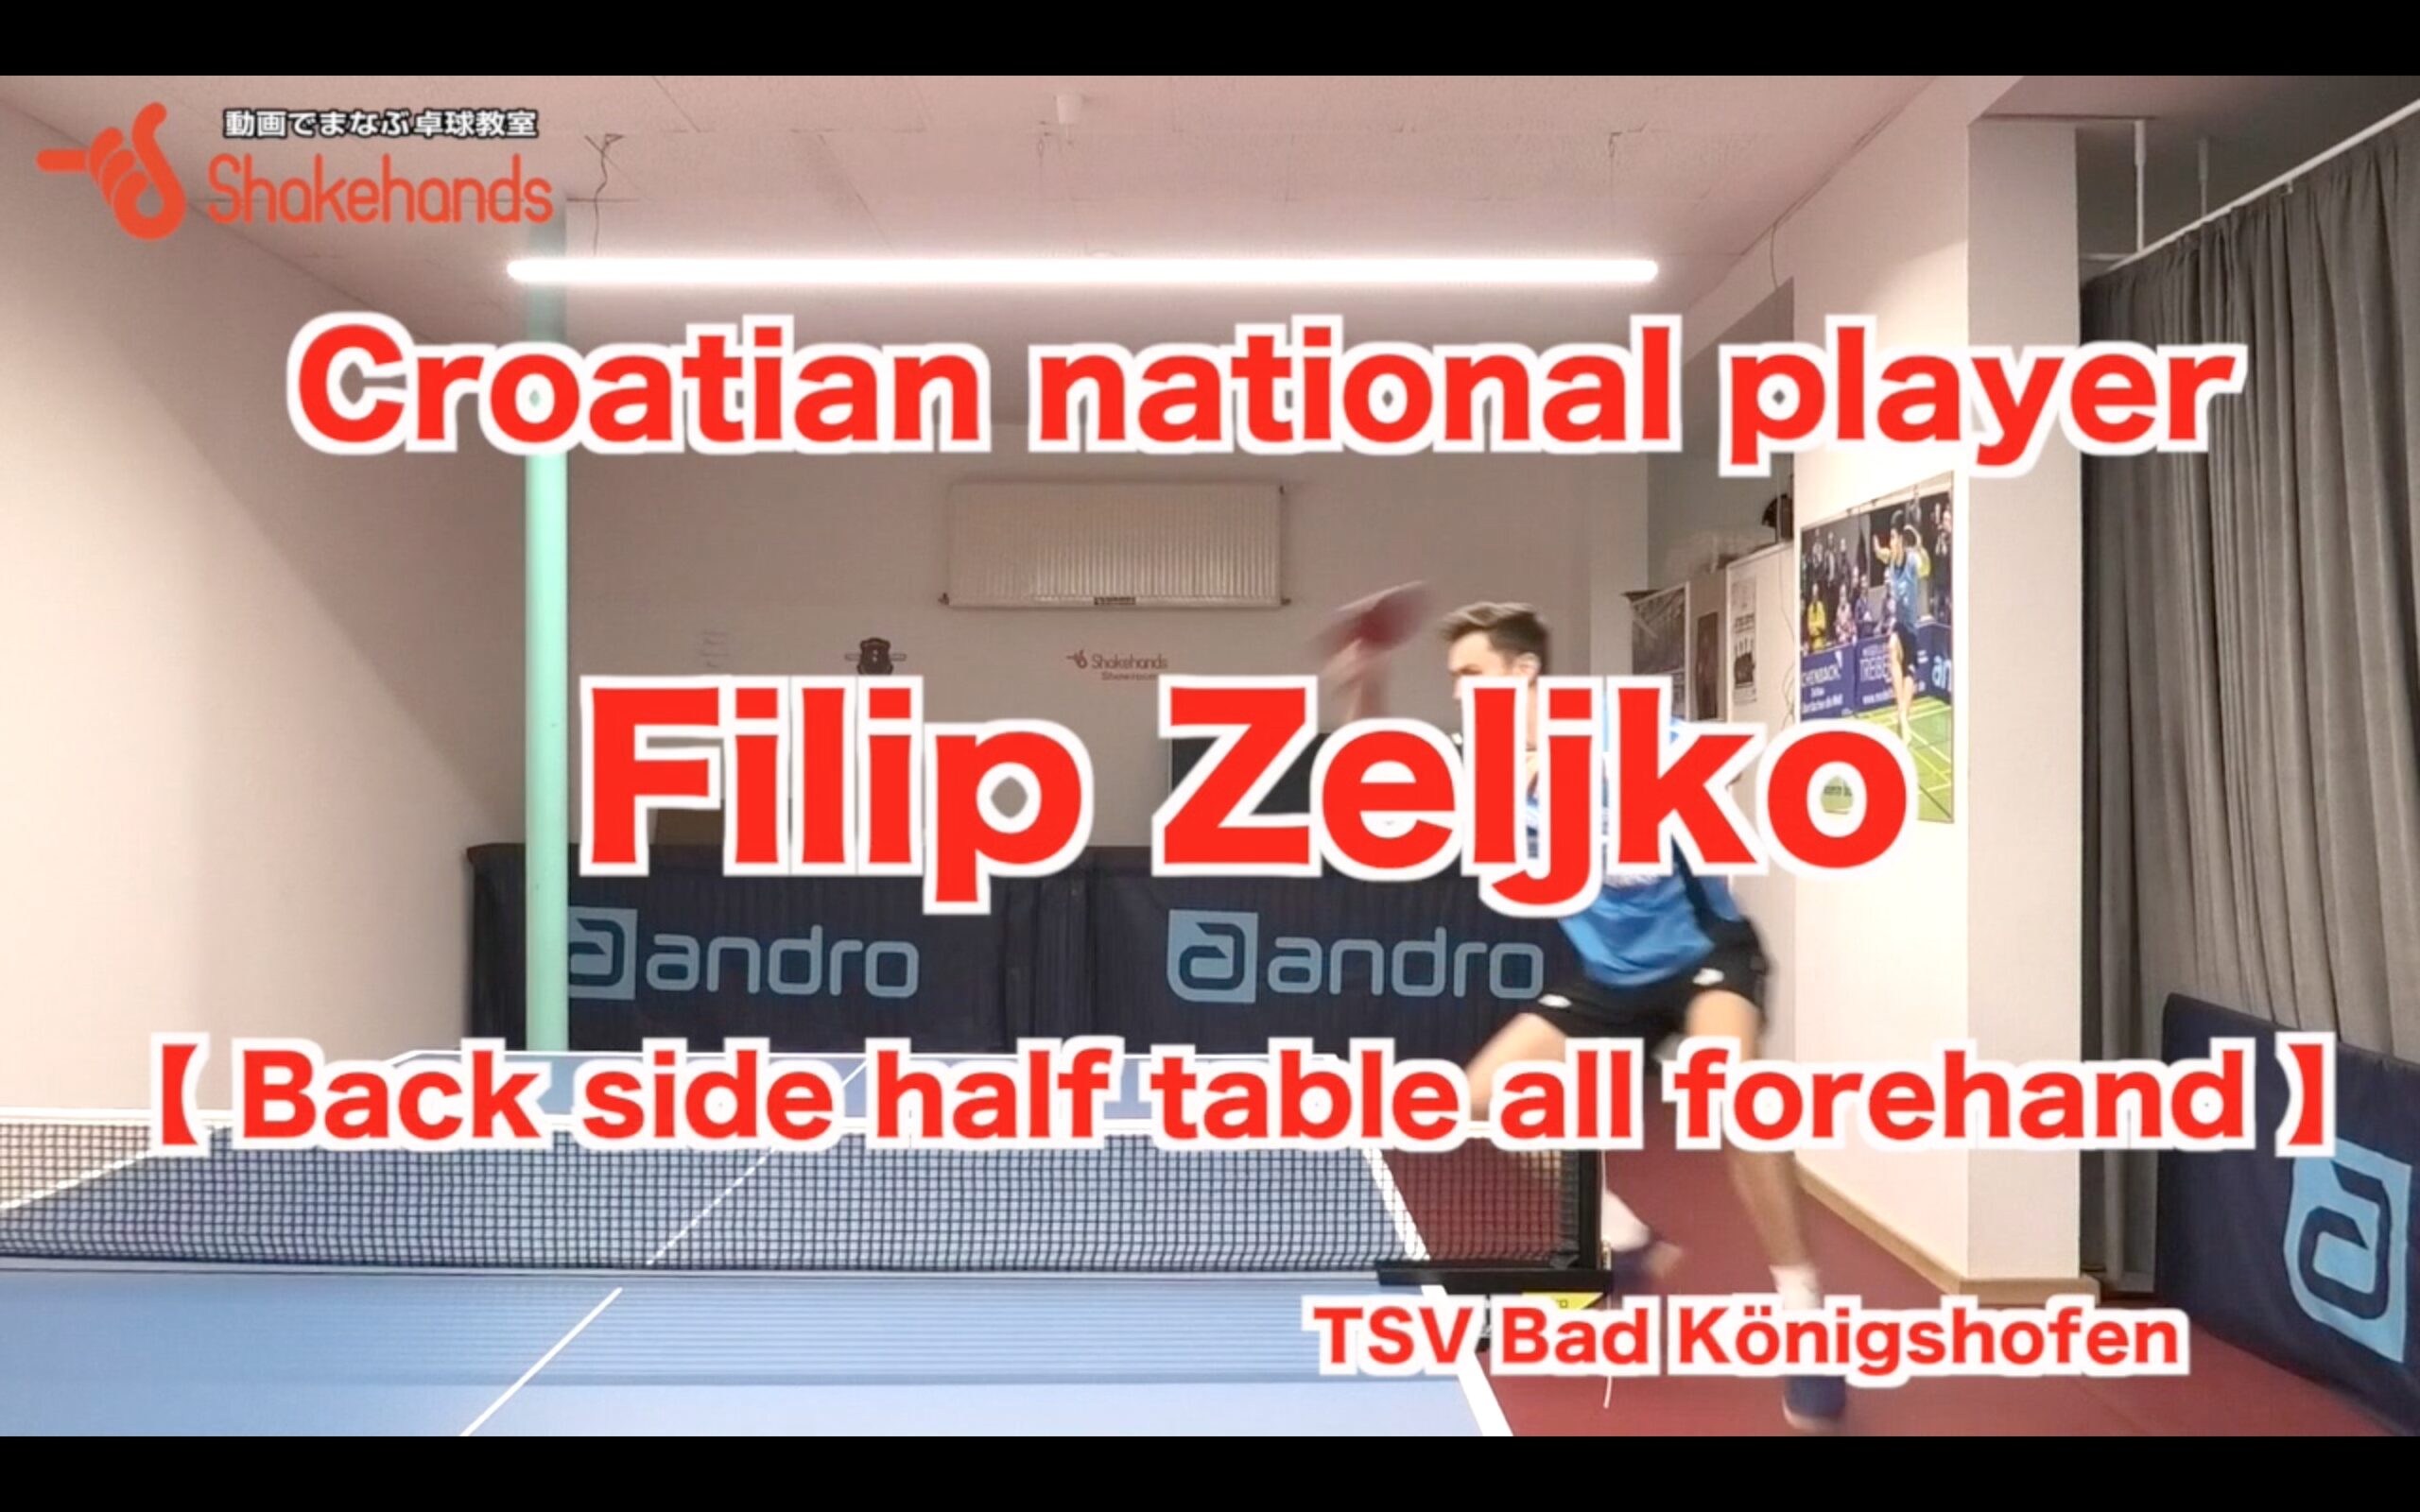 Back side half table all Forehand